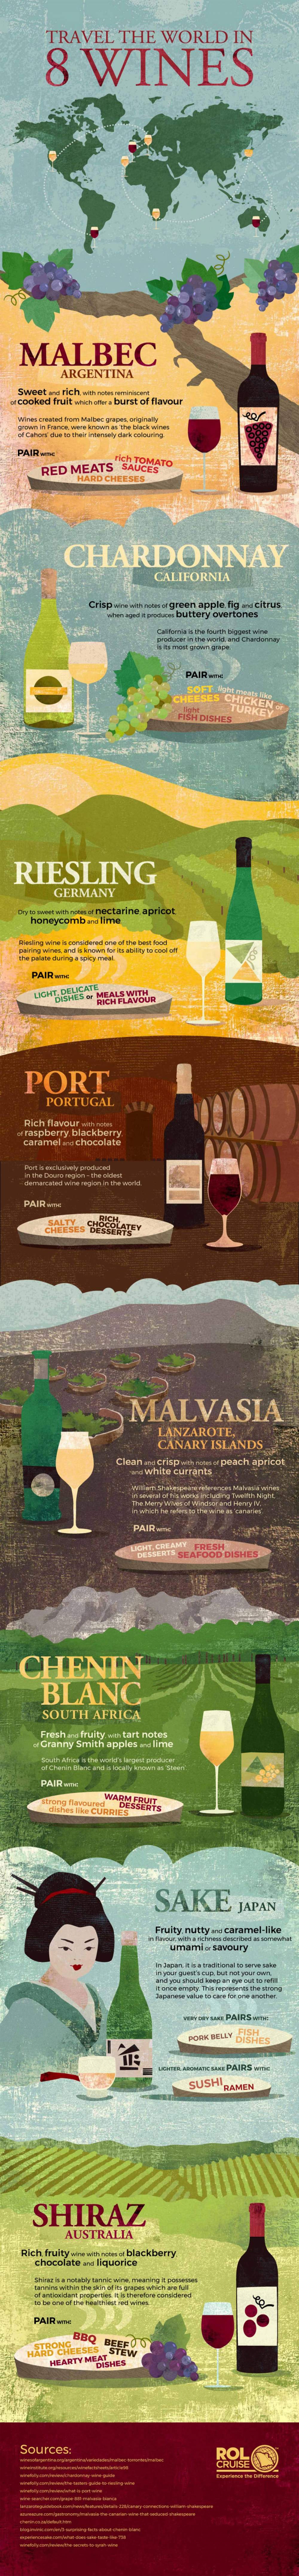 Travel the world in 8 wines